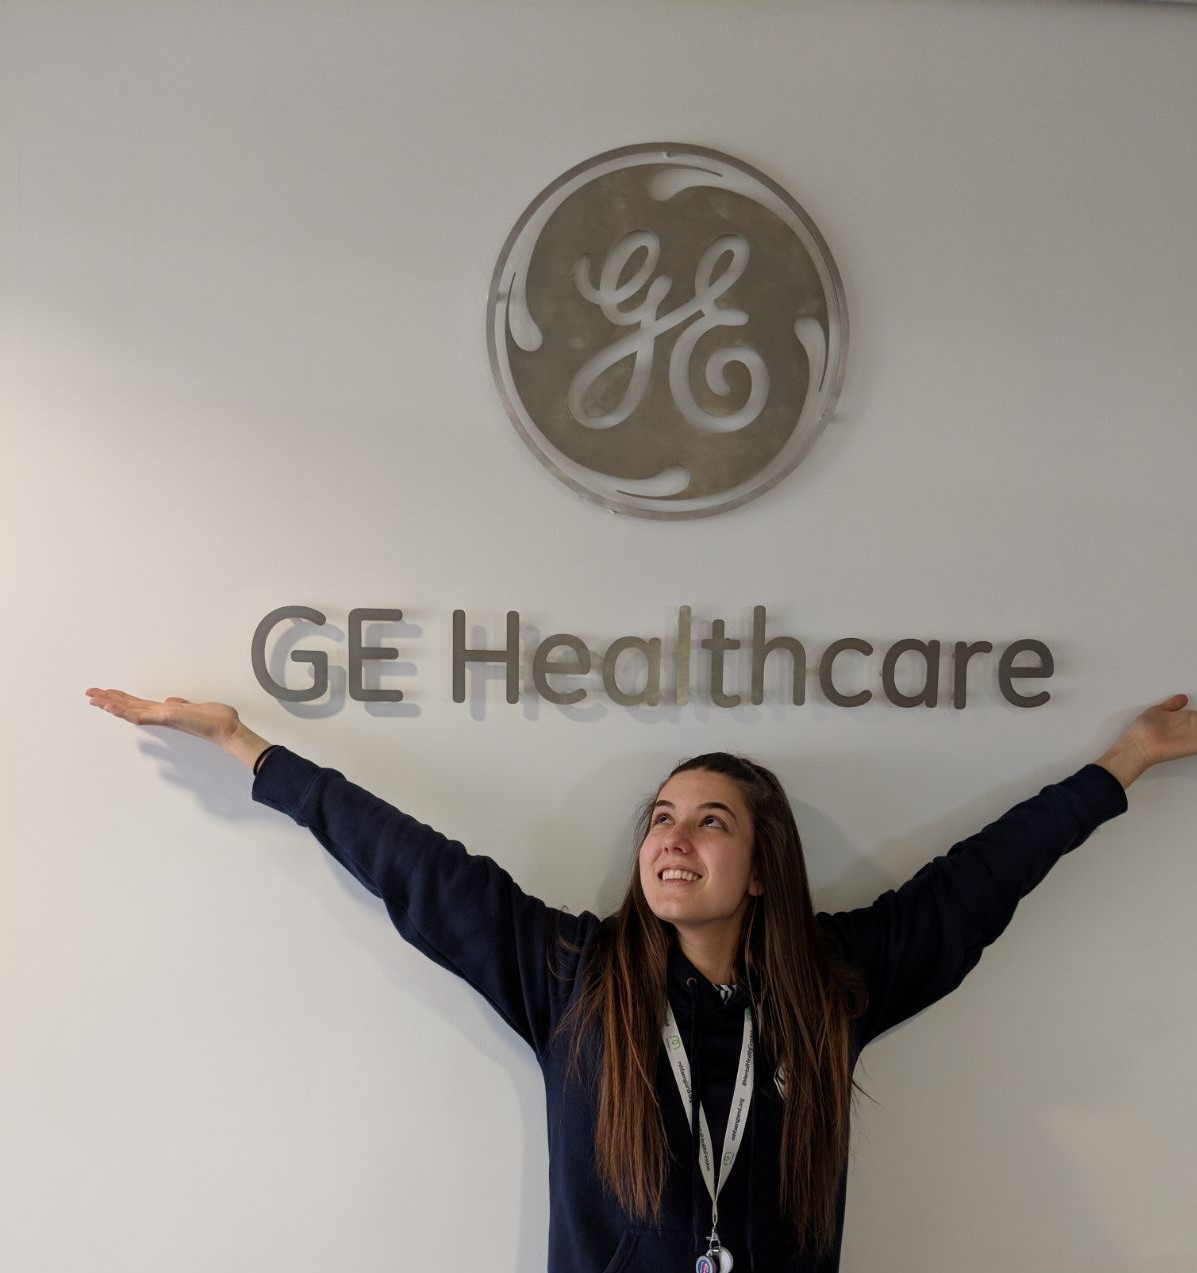 Eva at her placement at GE Healthcare